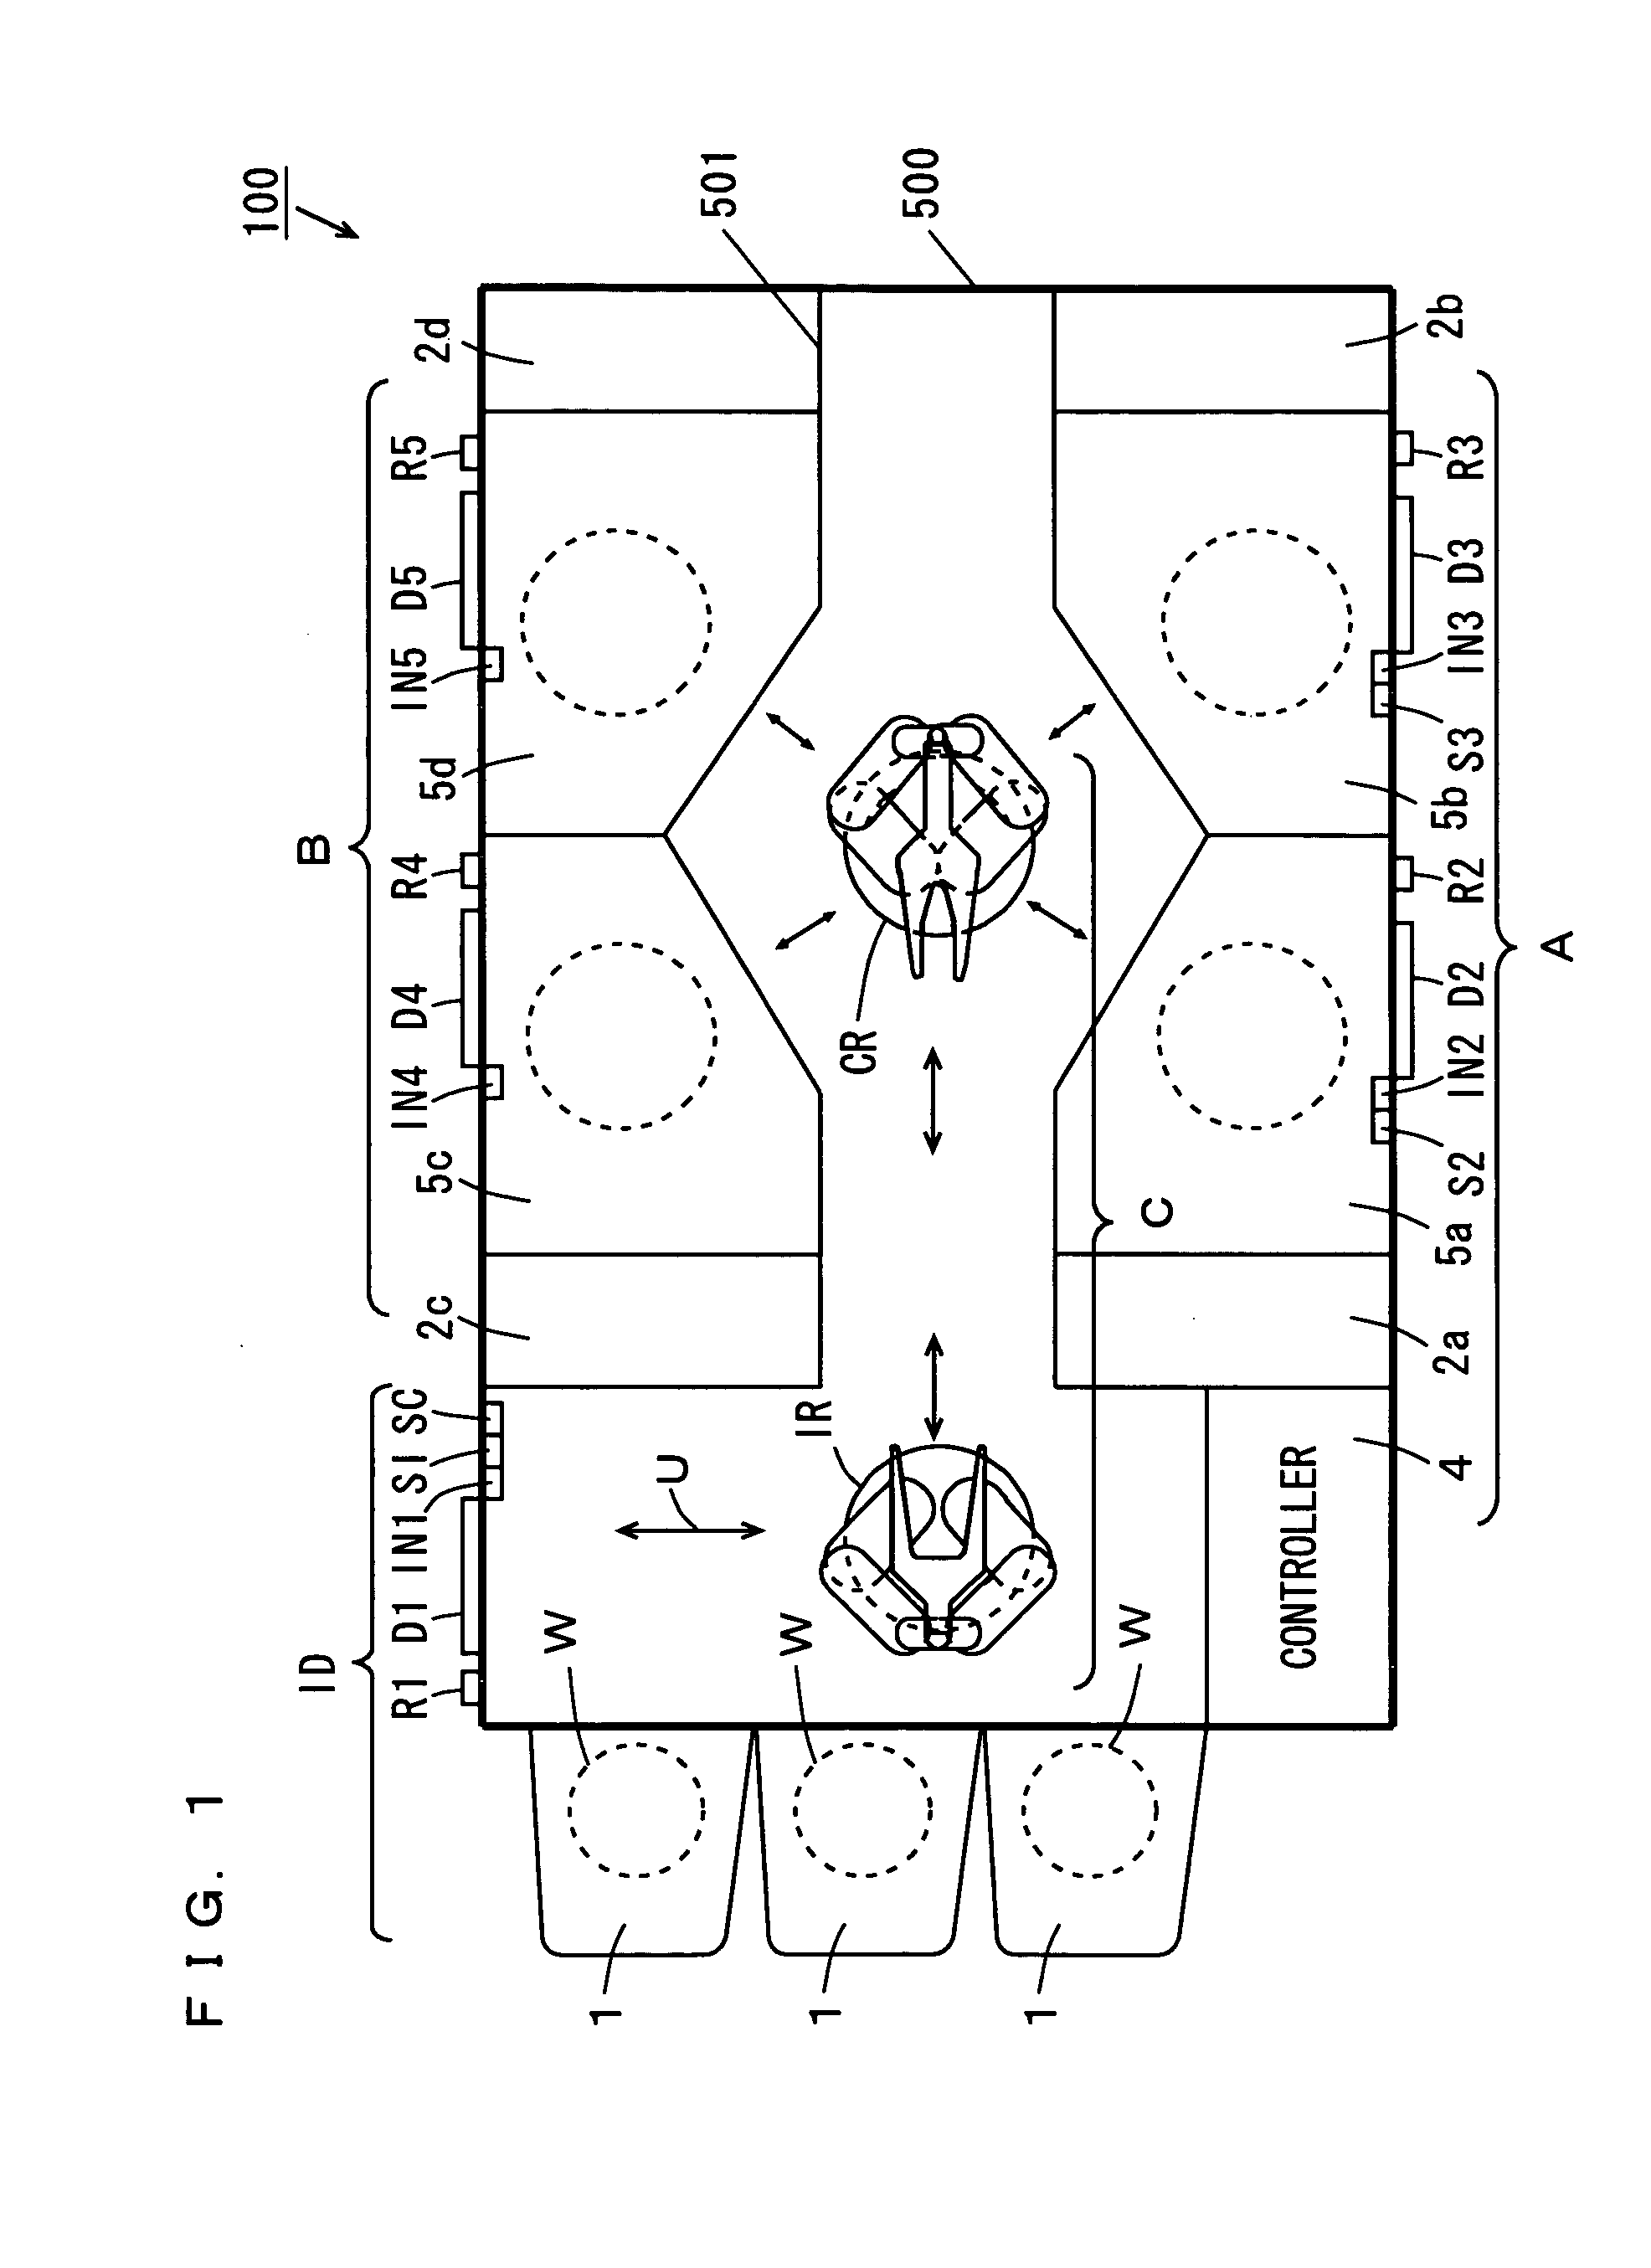 Substrate processing apparatus and management method